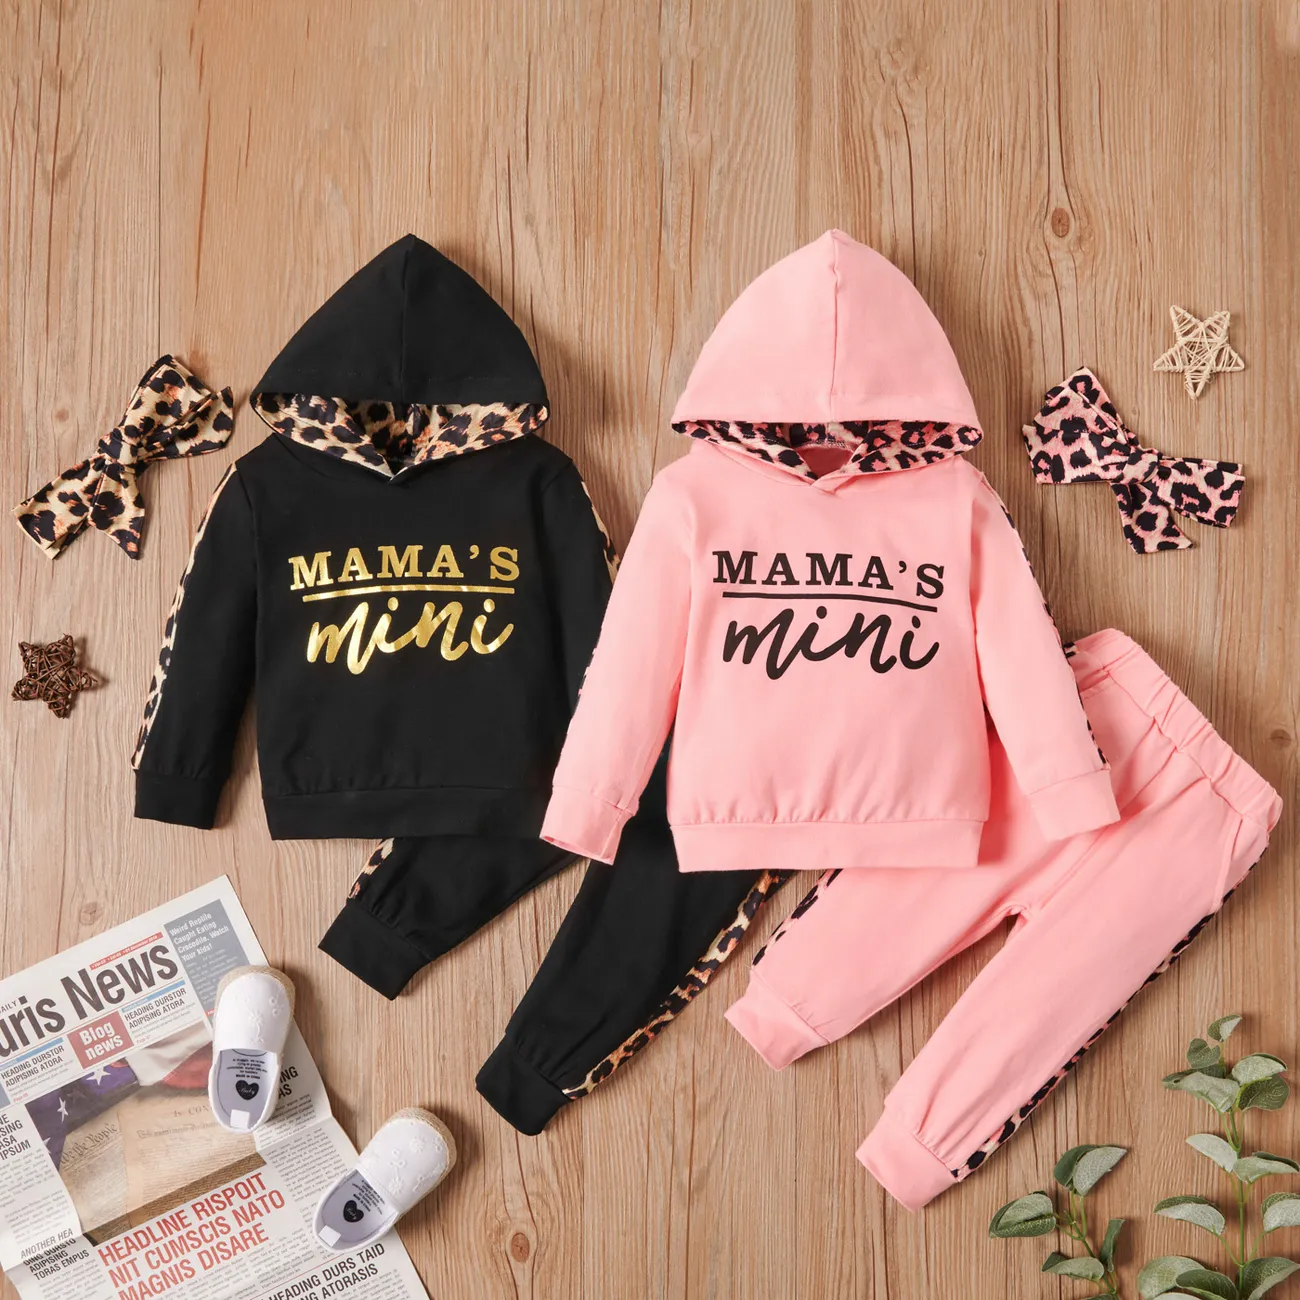 100% Cotton 3pcs Leopard and Letter Print Hooded Long-sleeve Baby Set Pink big image 1